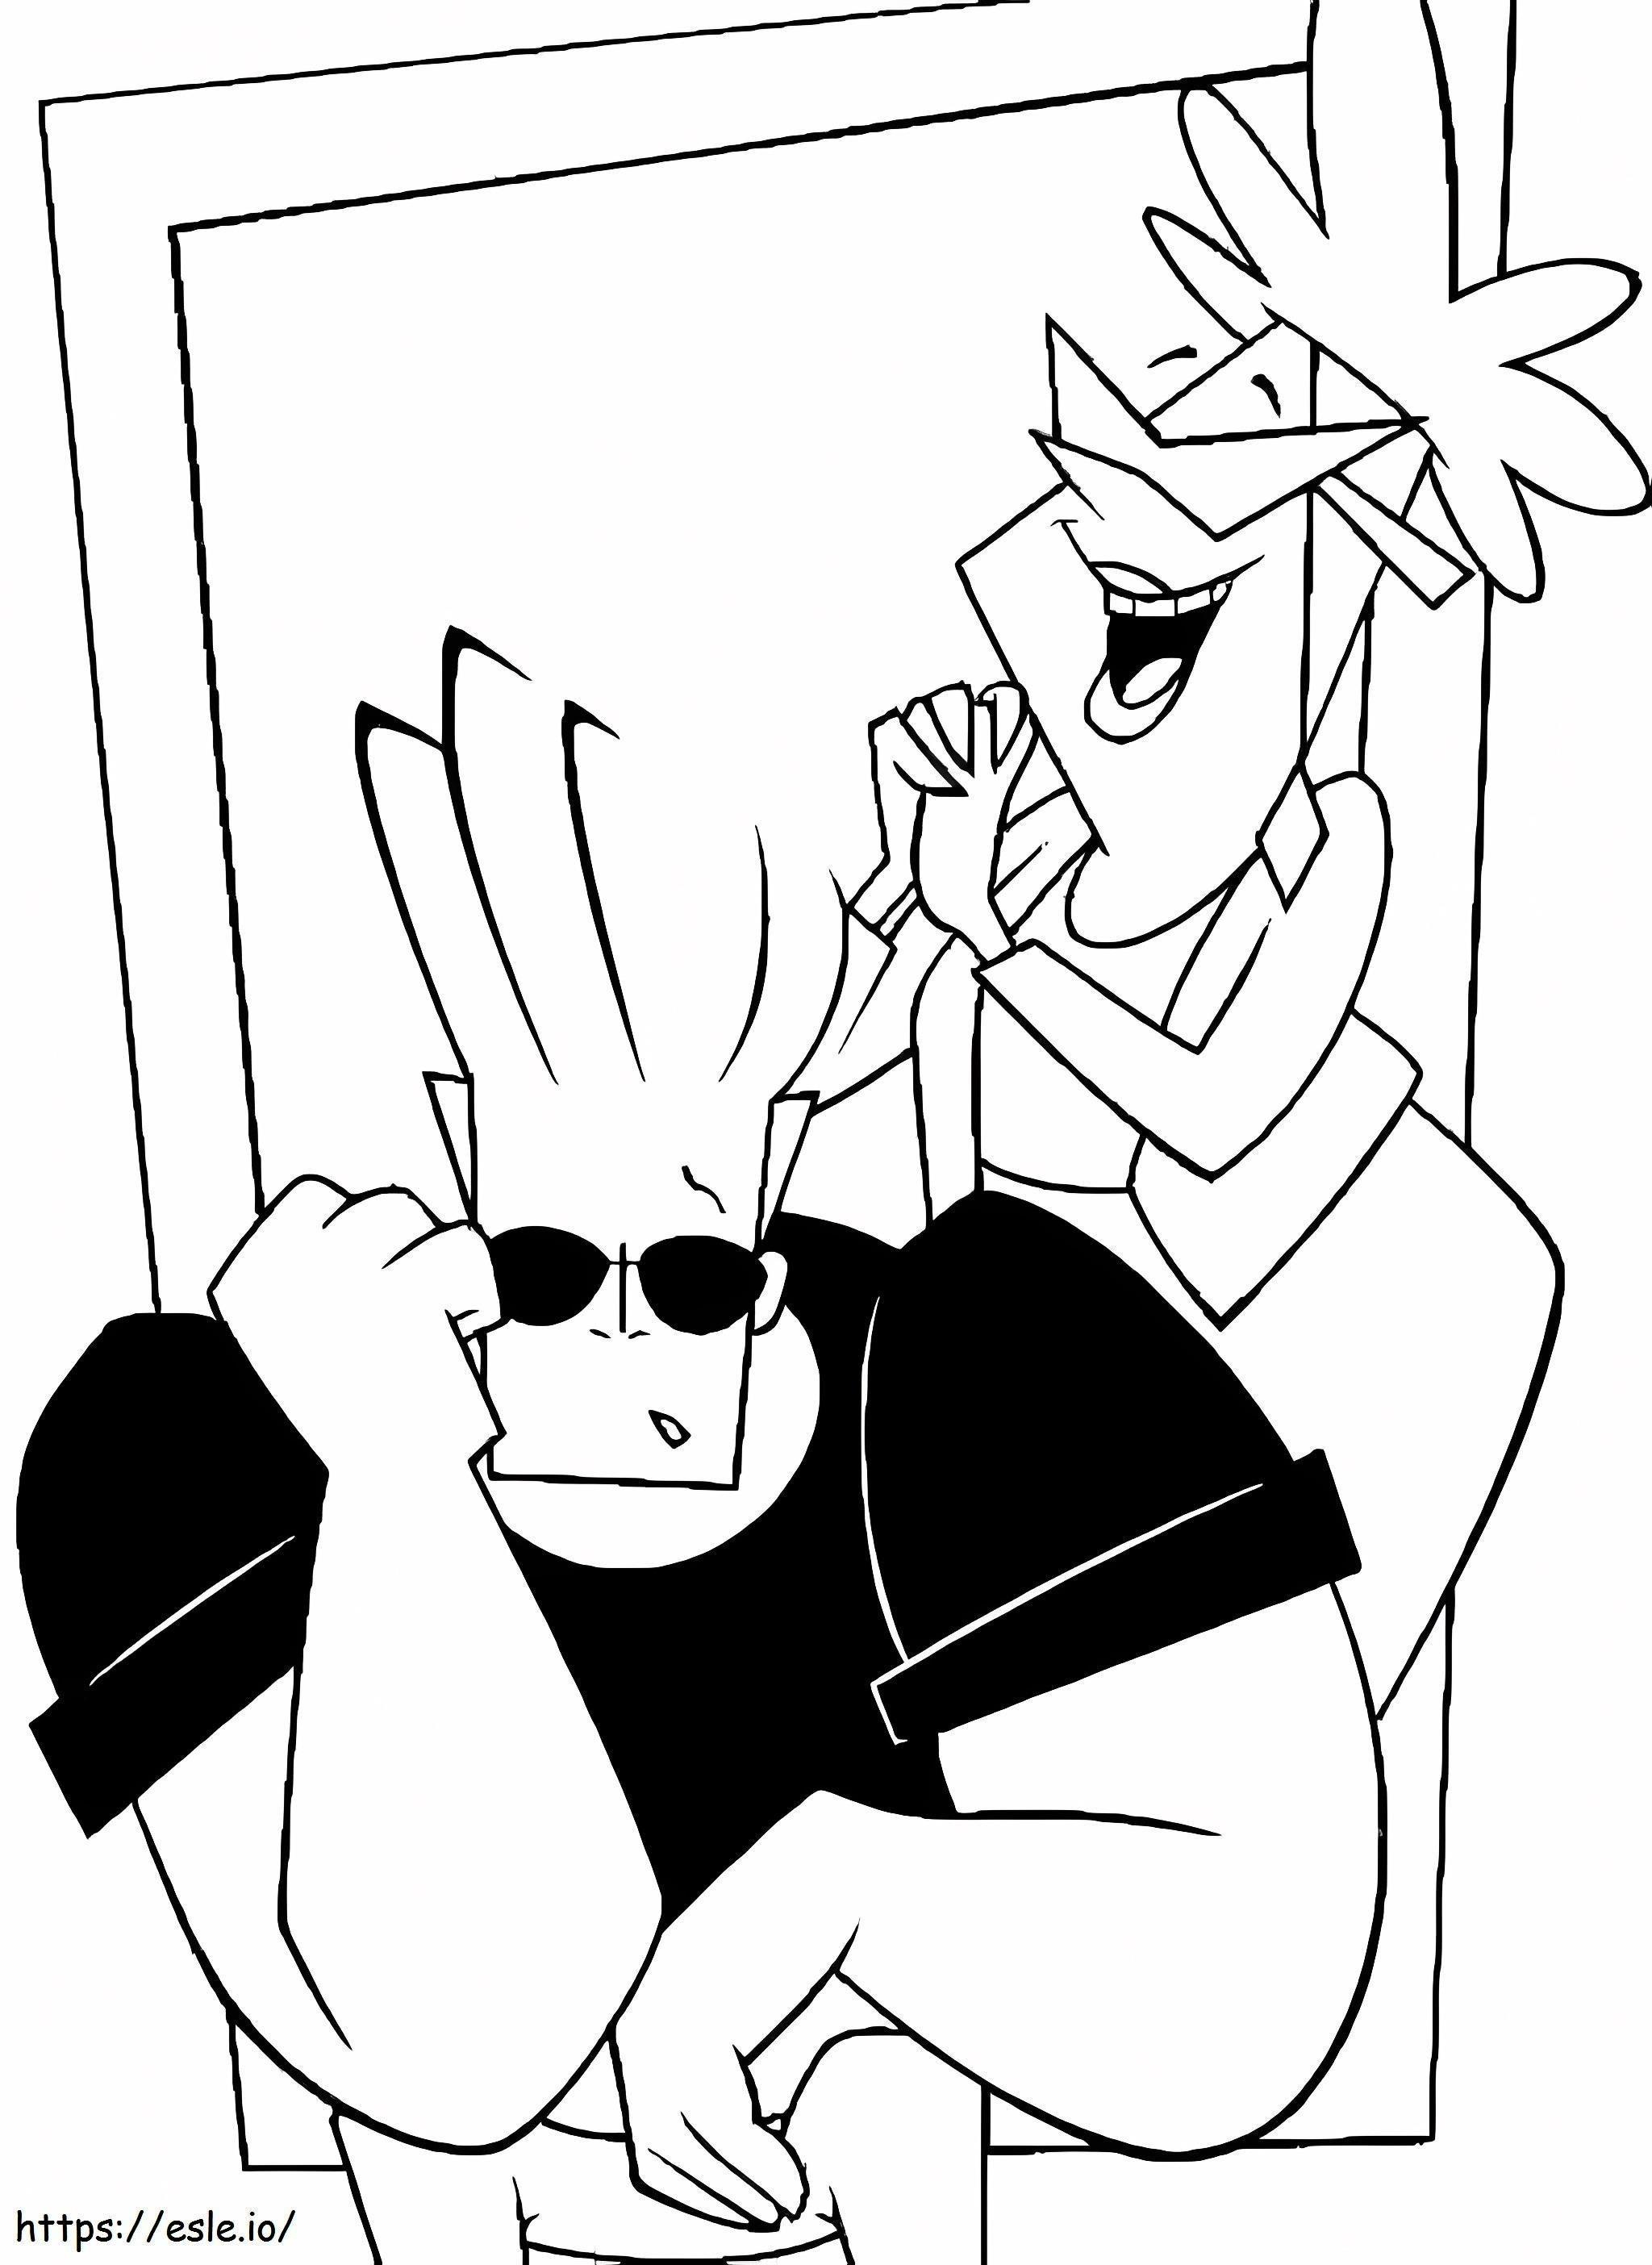 Bunny And Johnny Bravo coloring page